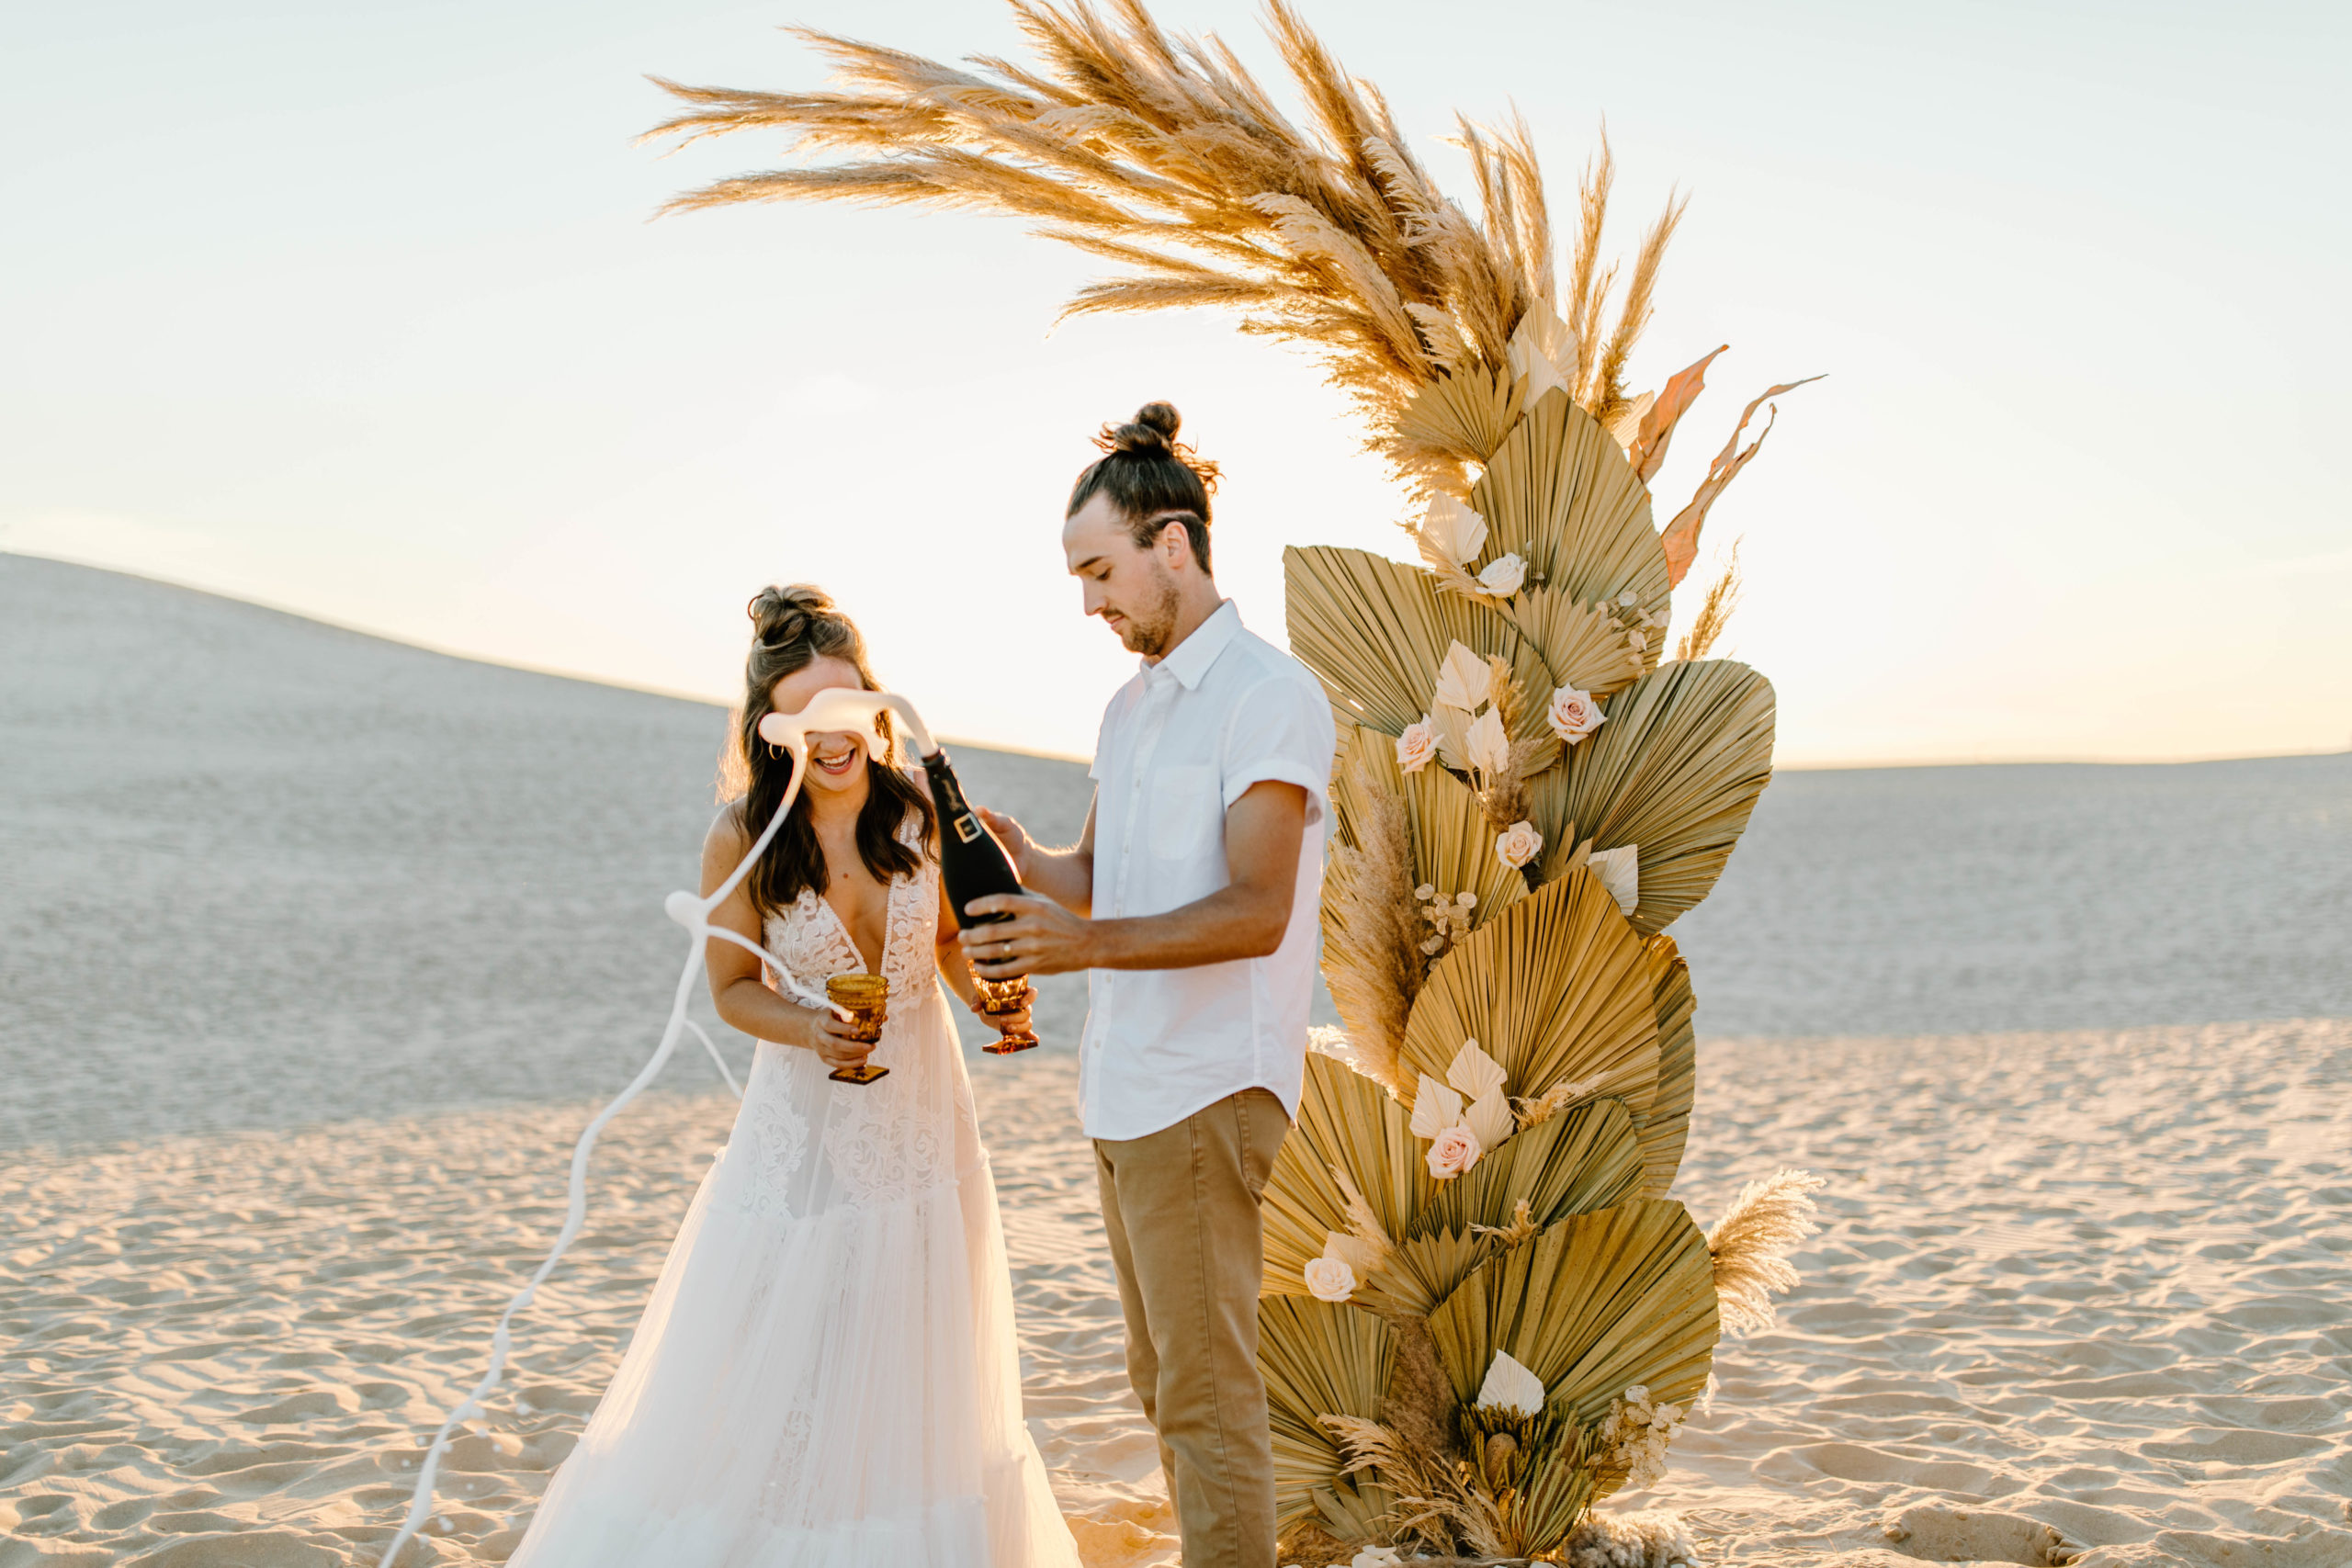 couple popping champagne at Sand Dune Elopement in front of Palms and Pampas Grass